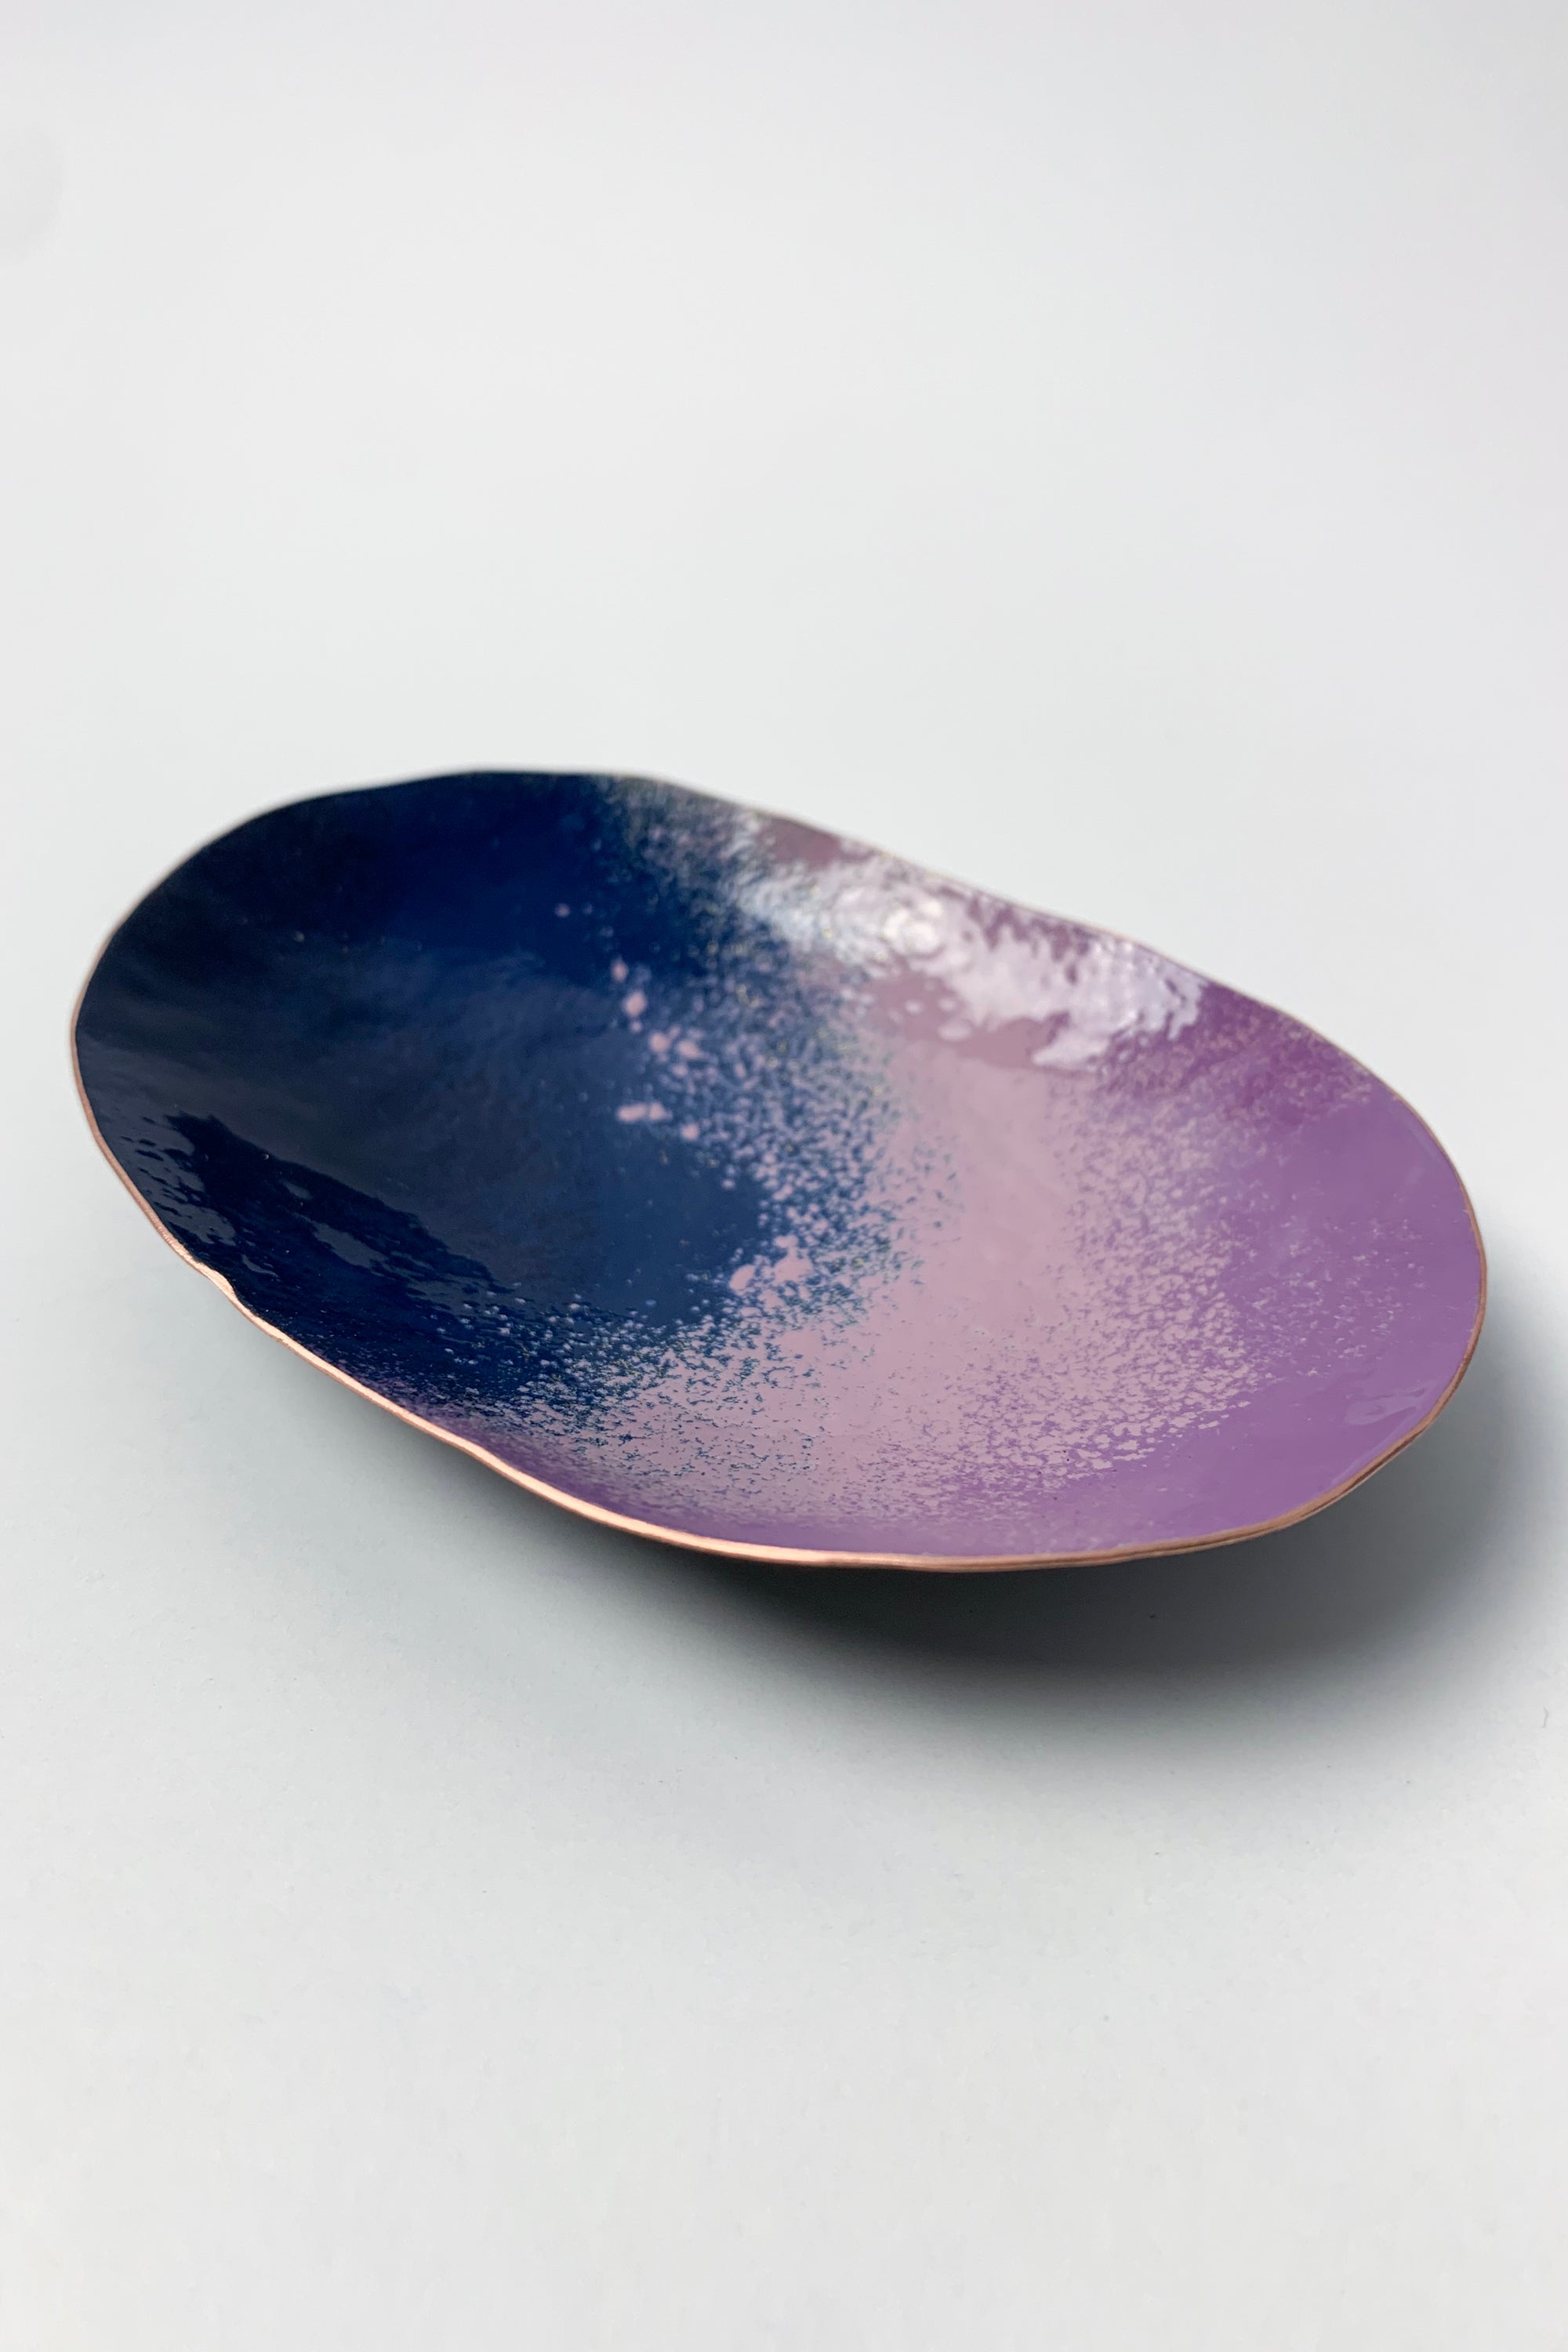 Oval Copper Dish in Navy and Lavender